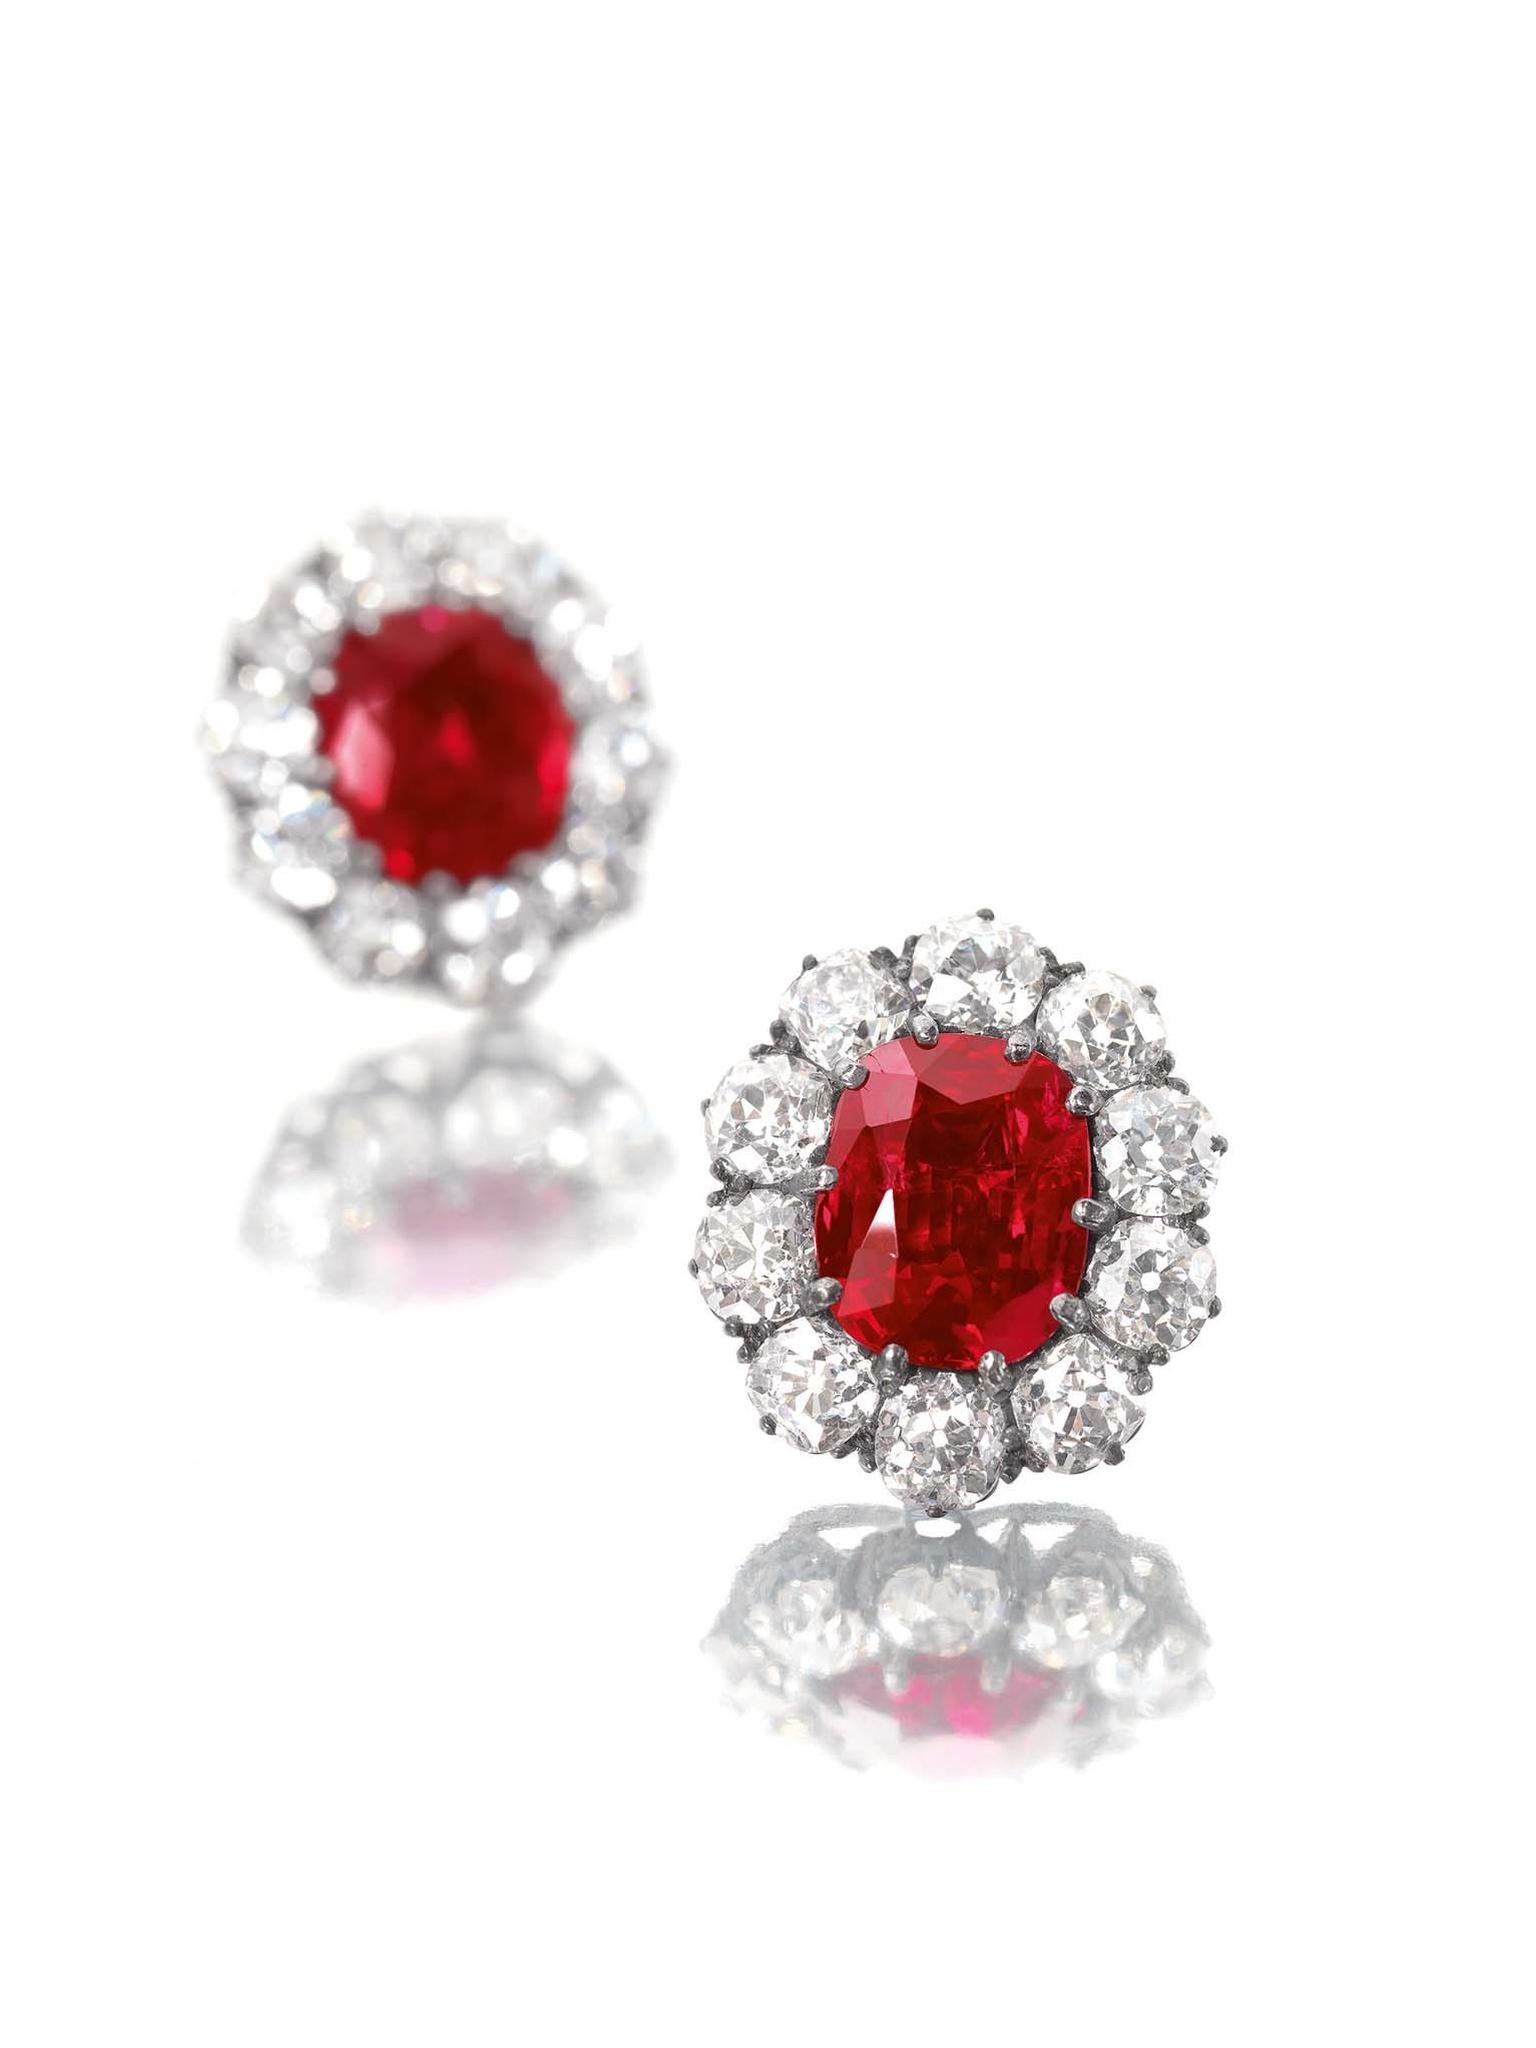 A pair of diamond earrings featuring two unheated rubies weighing 6.80 and 6.70ct respectively, which originate from the world’s best ruby source, the famous Mogok Valley in Burma, achieved US$2,975,935 (Estimate: US$2.5-3.2 million).